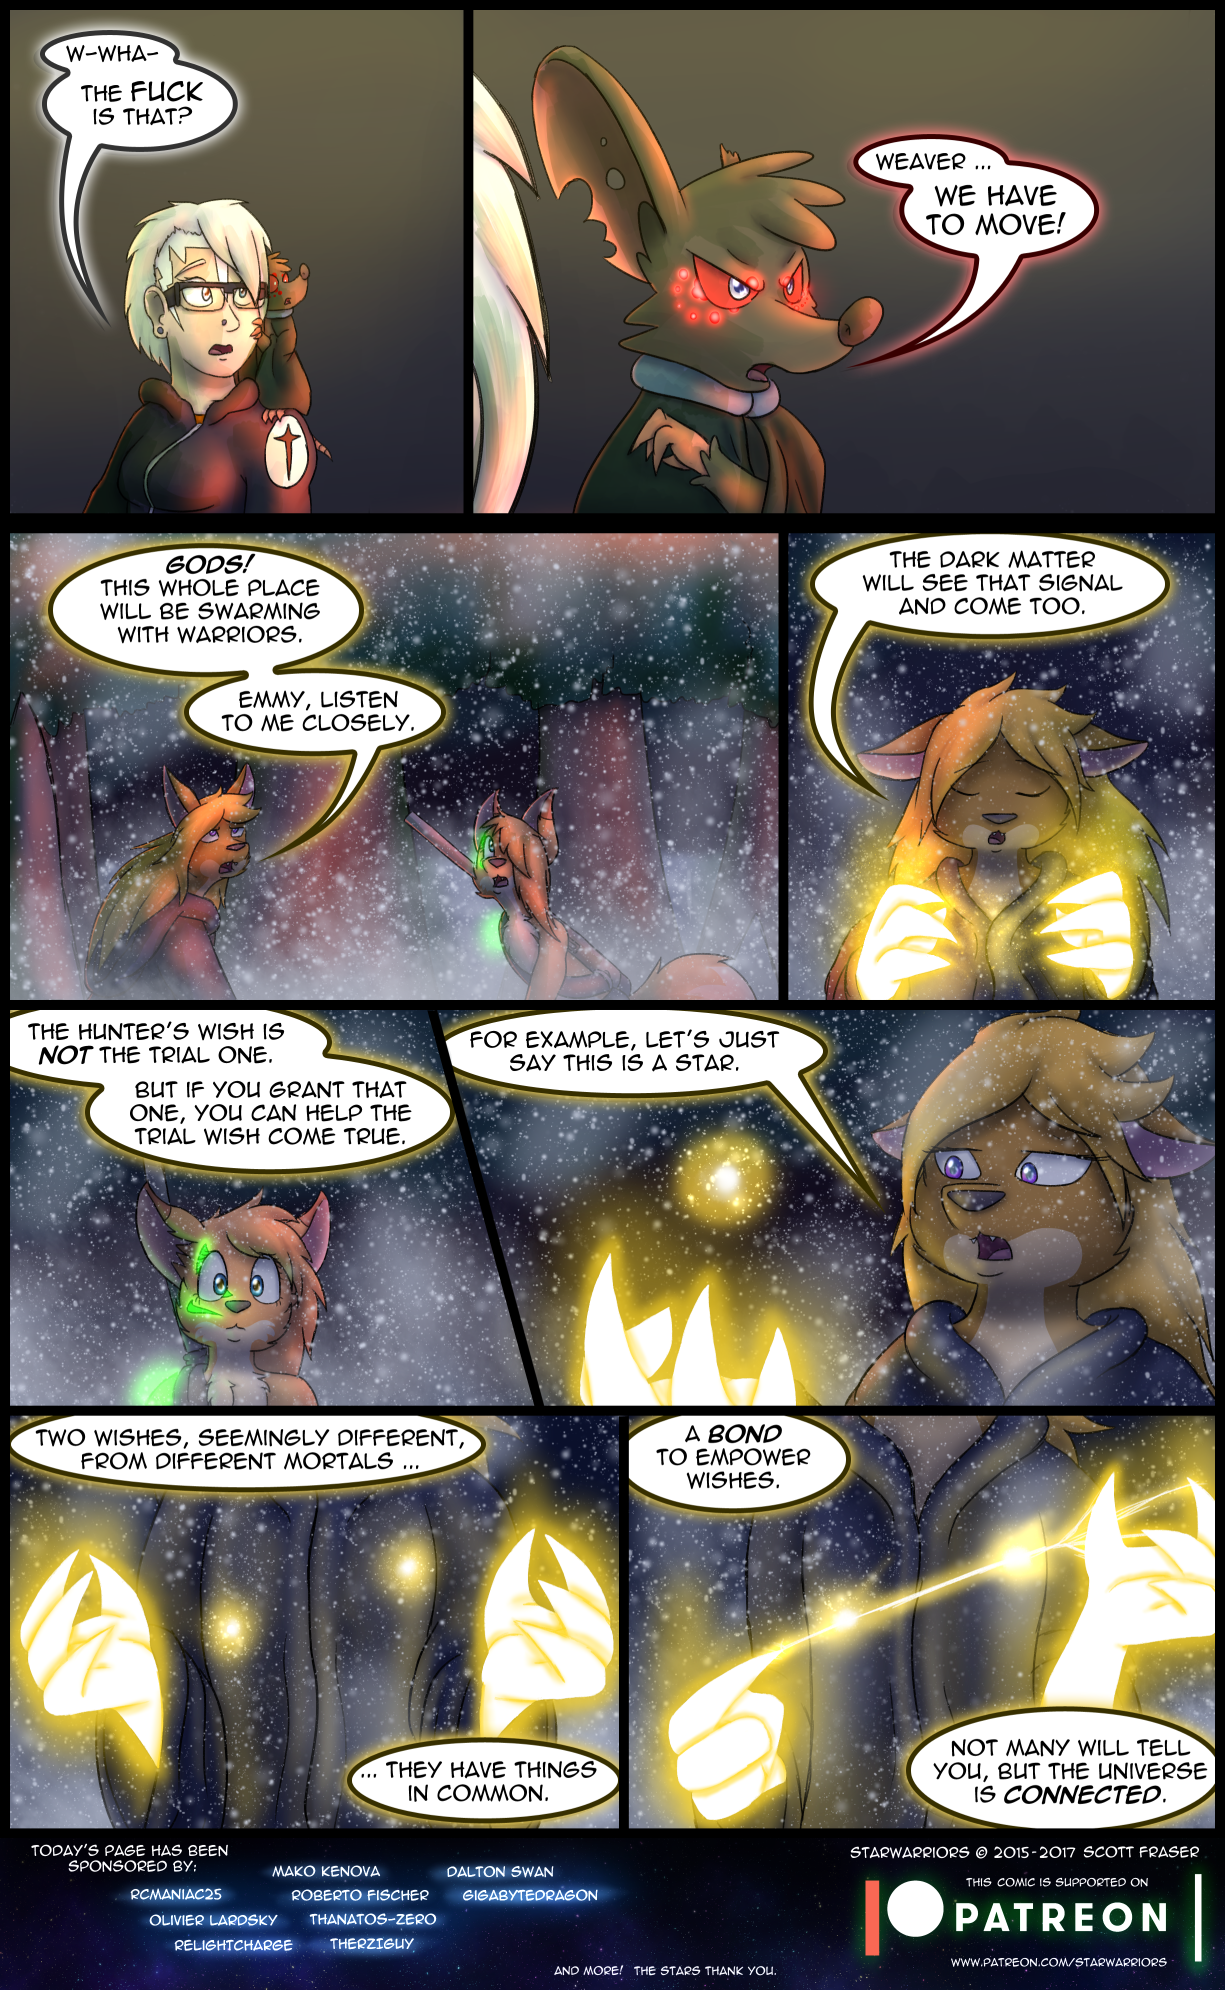 Ch3 Page 10 – Connection